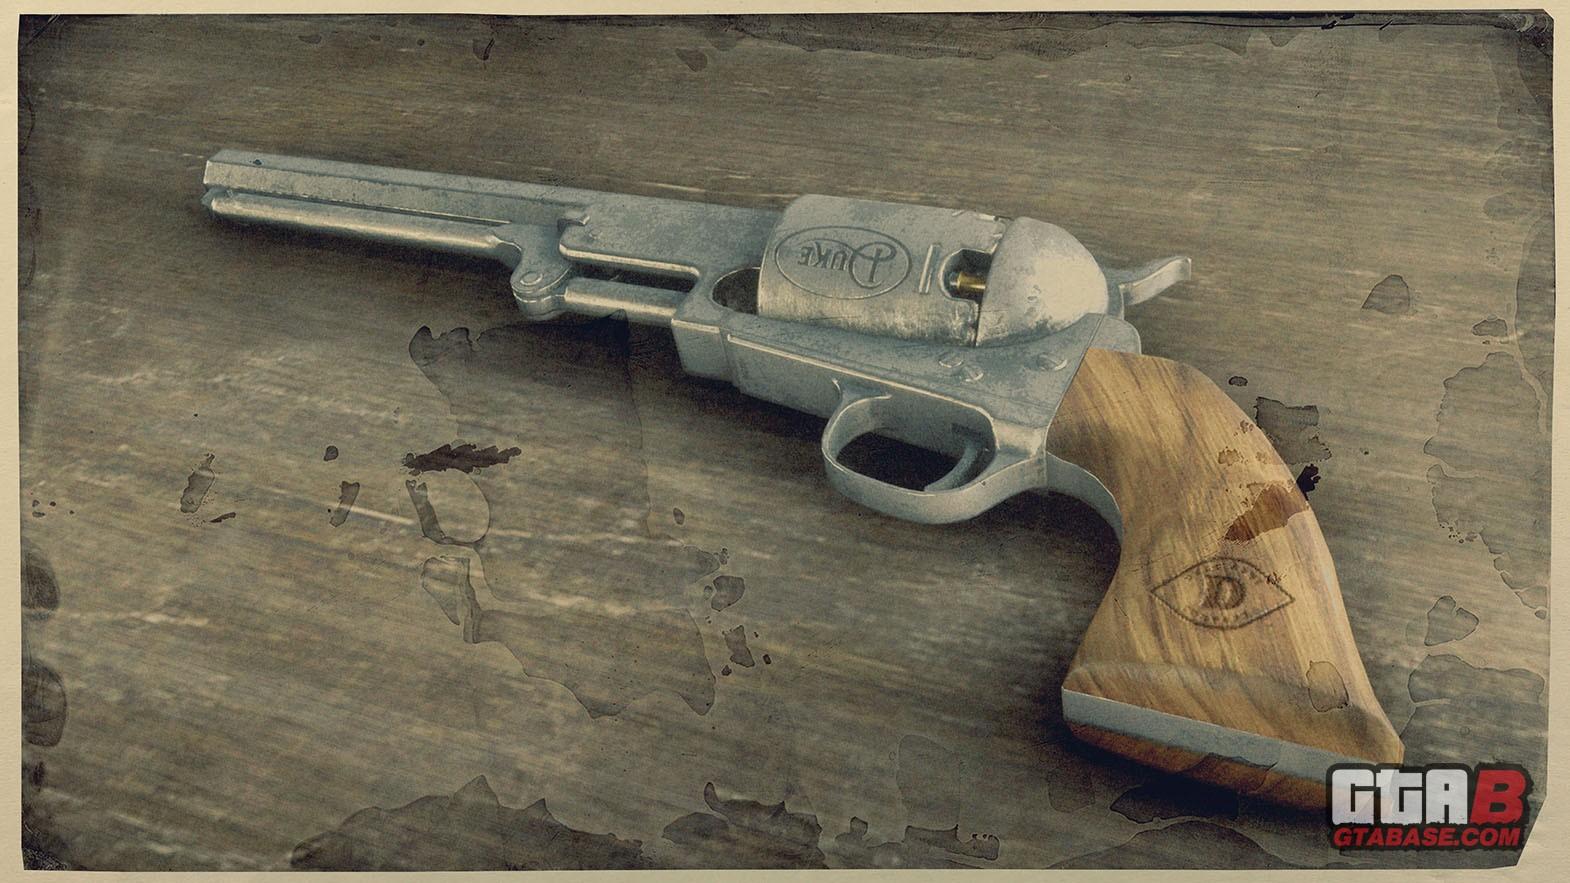 Red Dead Redemption 2 Online Navy Revolver: How to get free